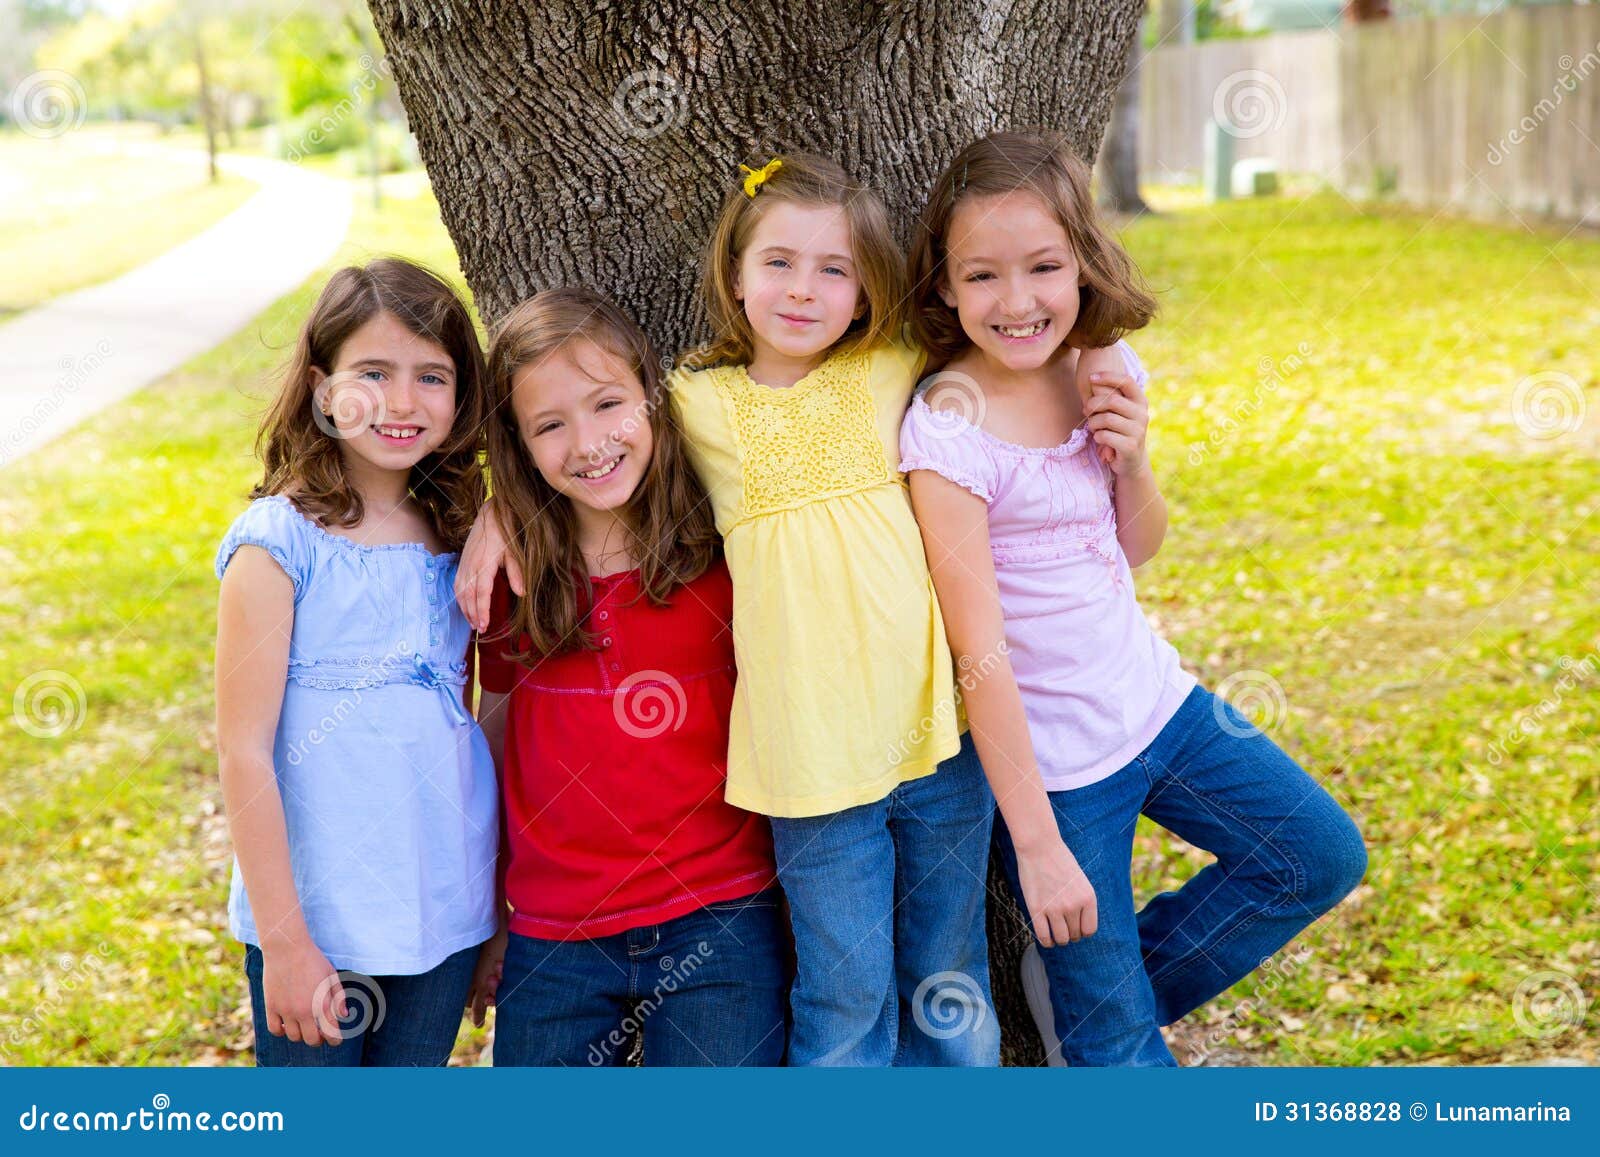 Children Group Friend Girls Playing on Tree Stock Photo - Image of ...